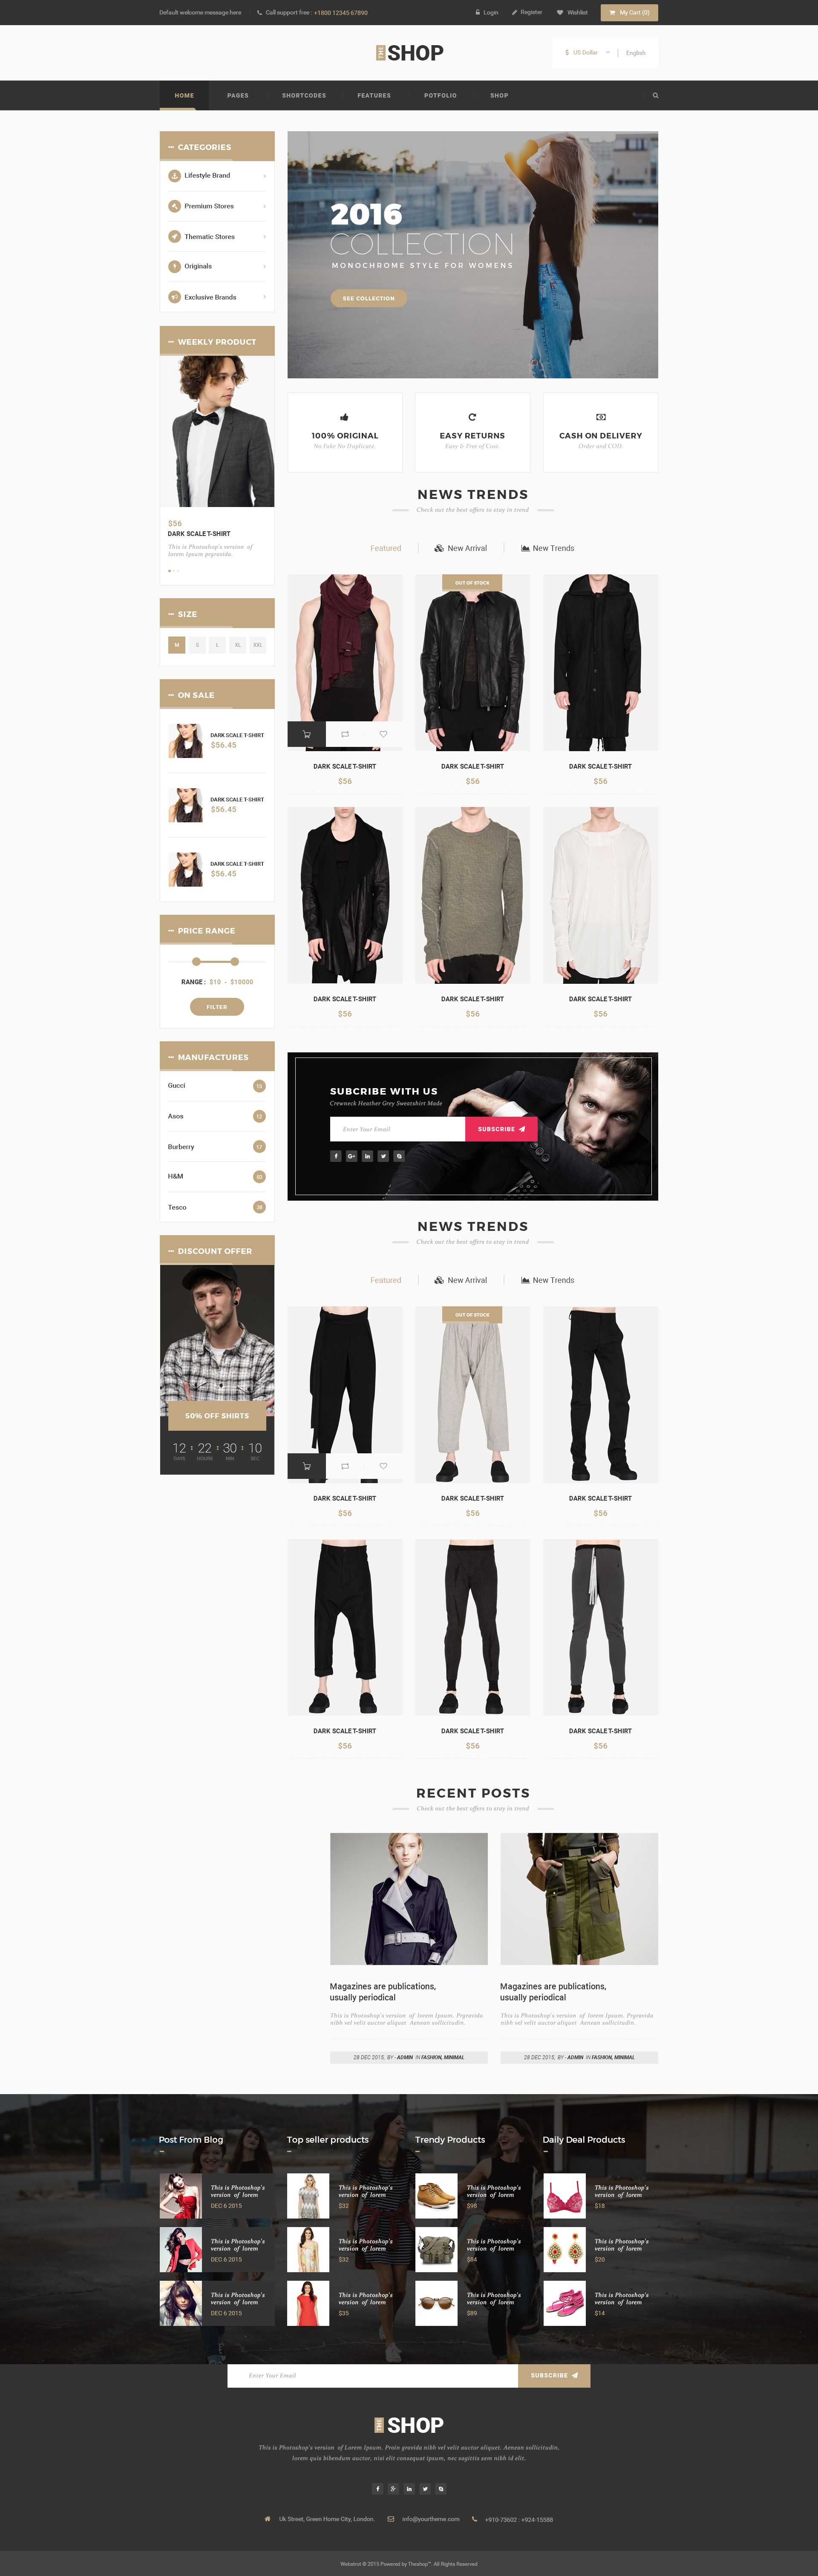 The Shop | Multipurpose e-commerce HTML Template by webstrot | ThemeForest